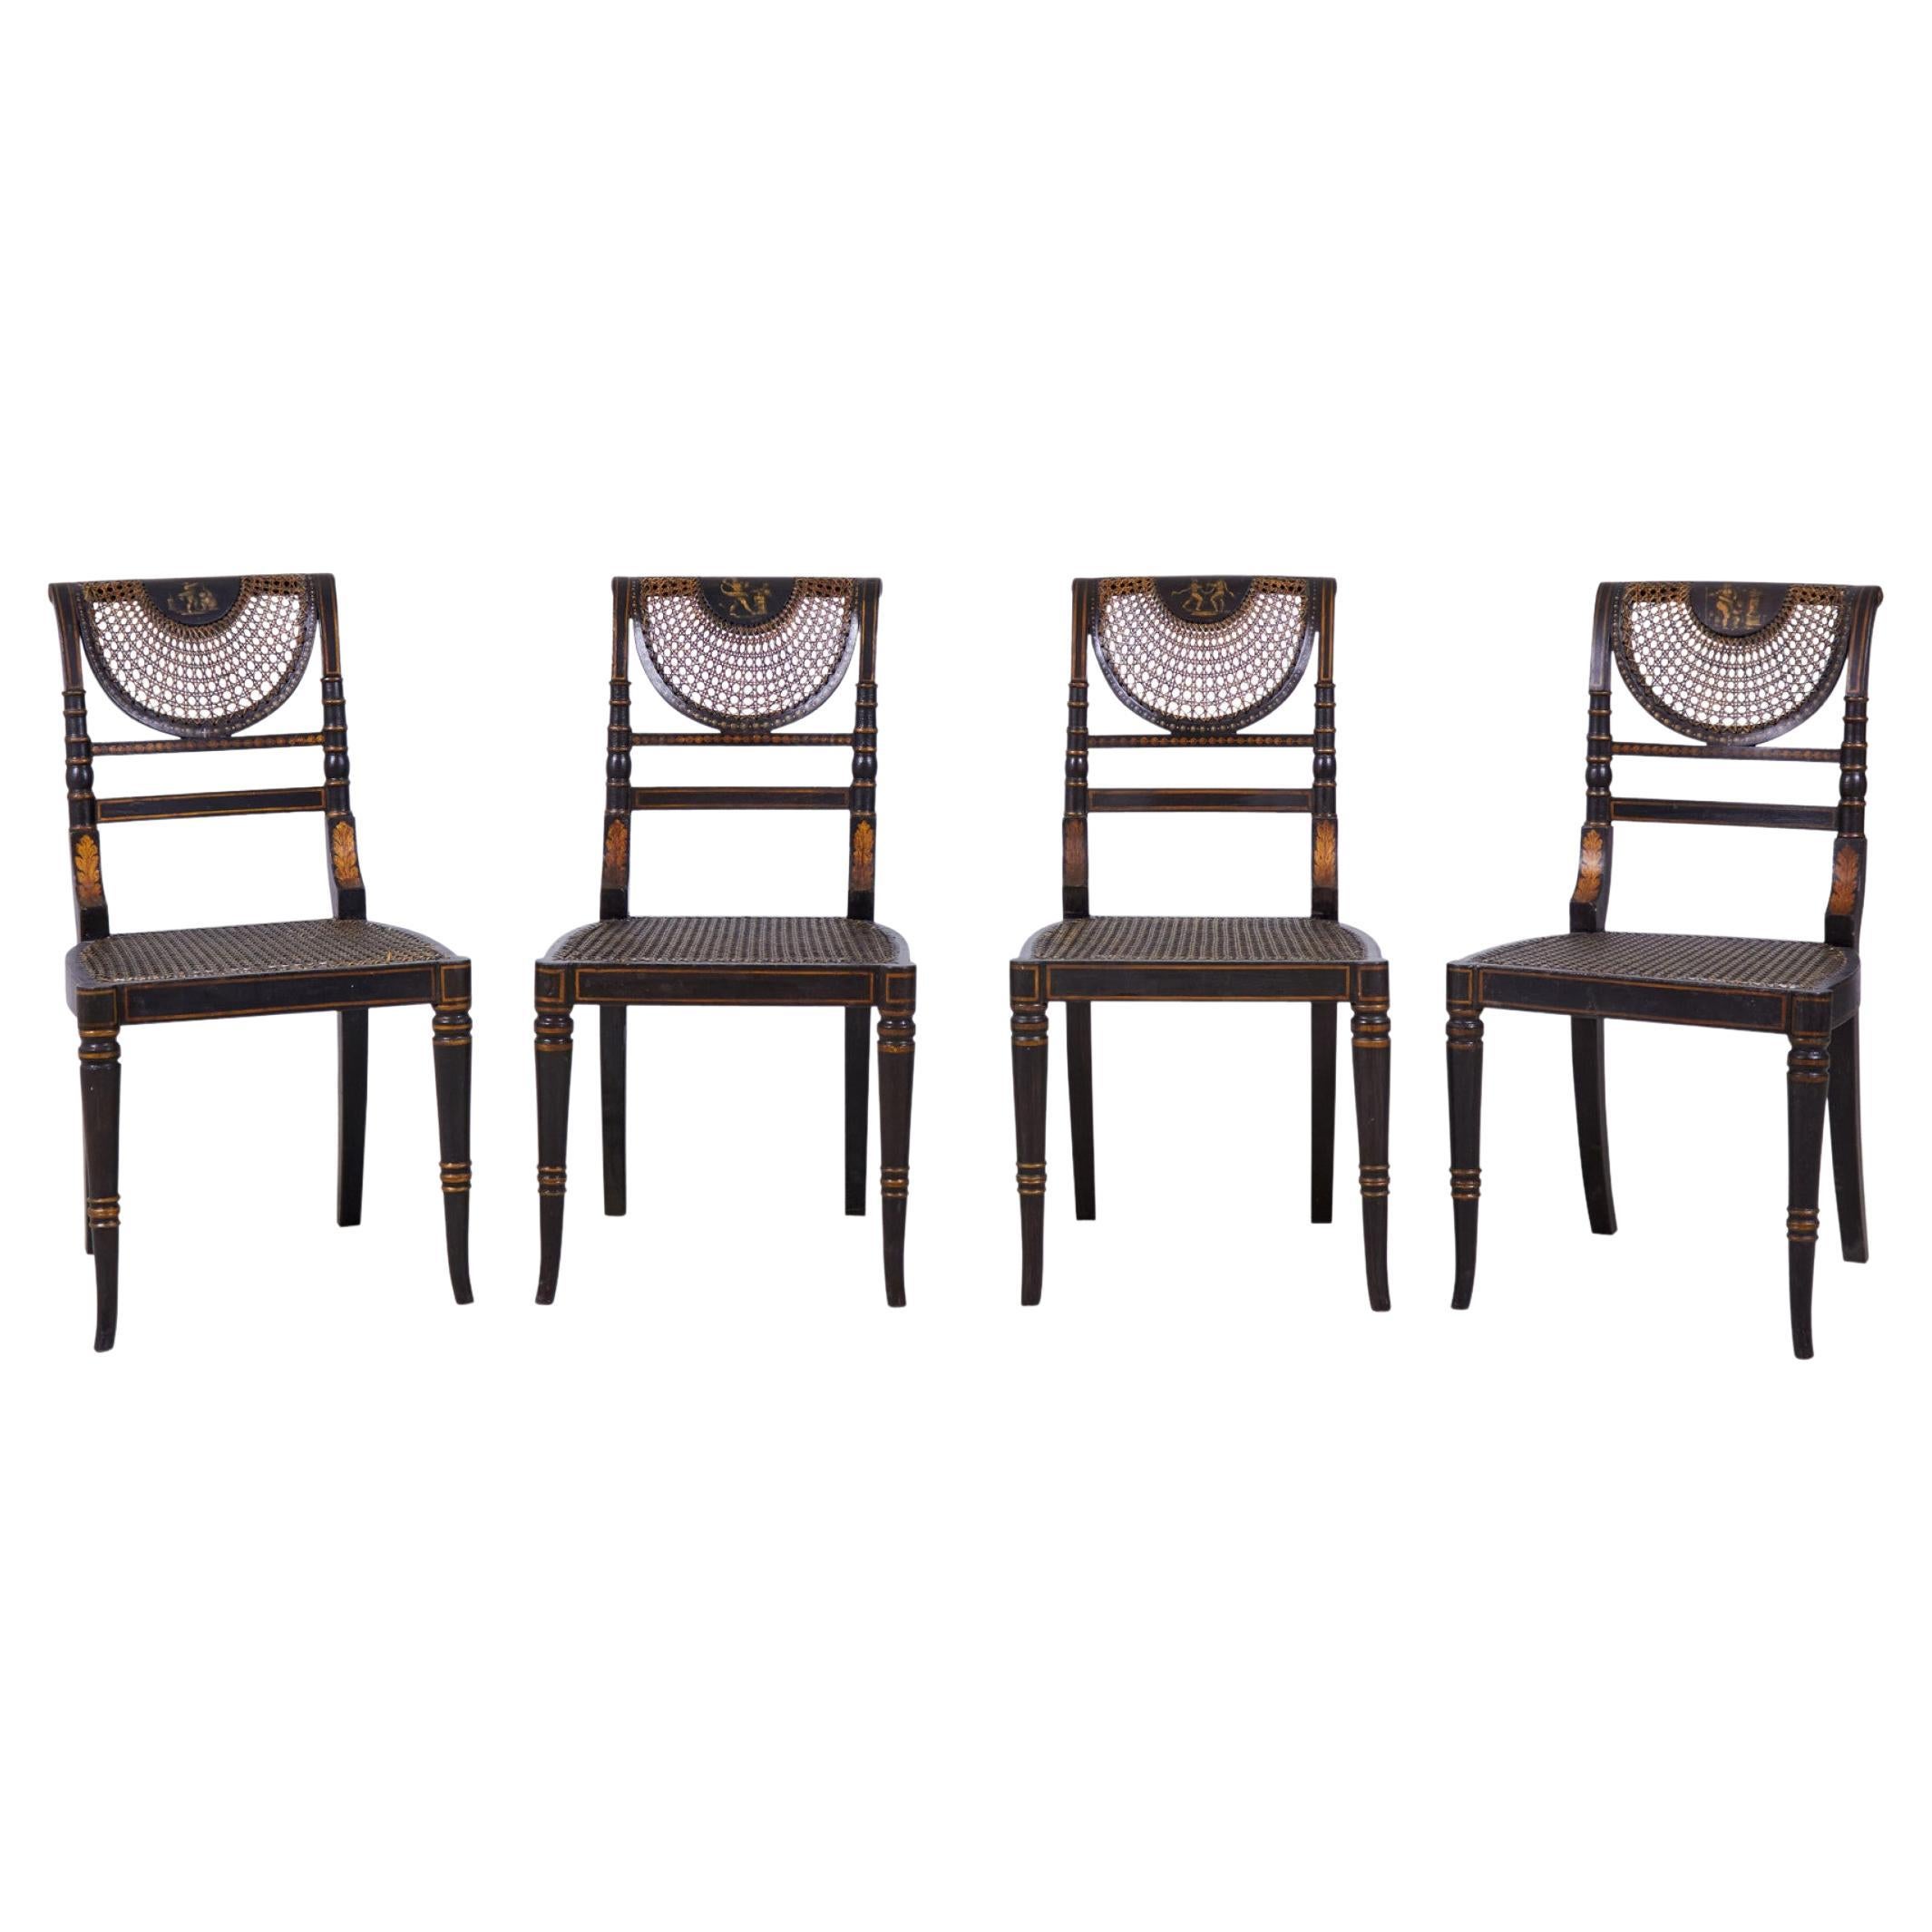 Set of 4 English Regency Black and Gold Painted Cane Seat Side Chairs